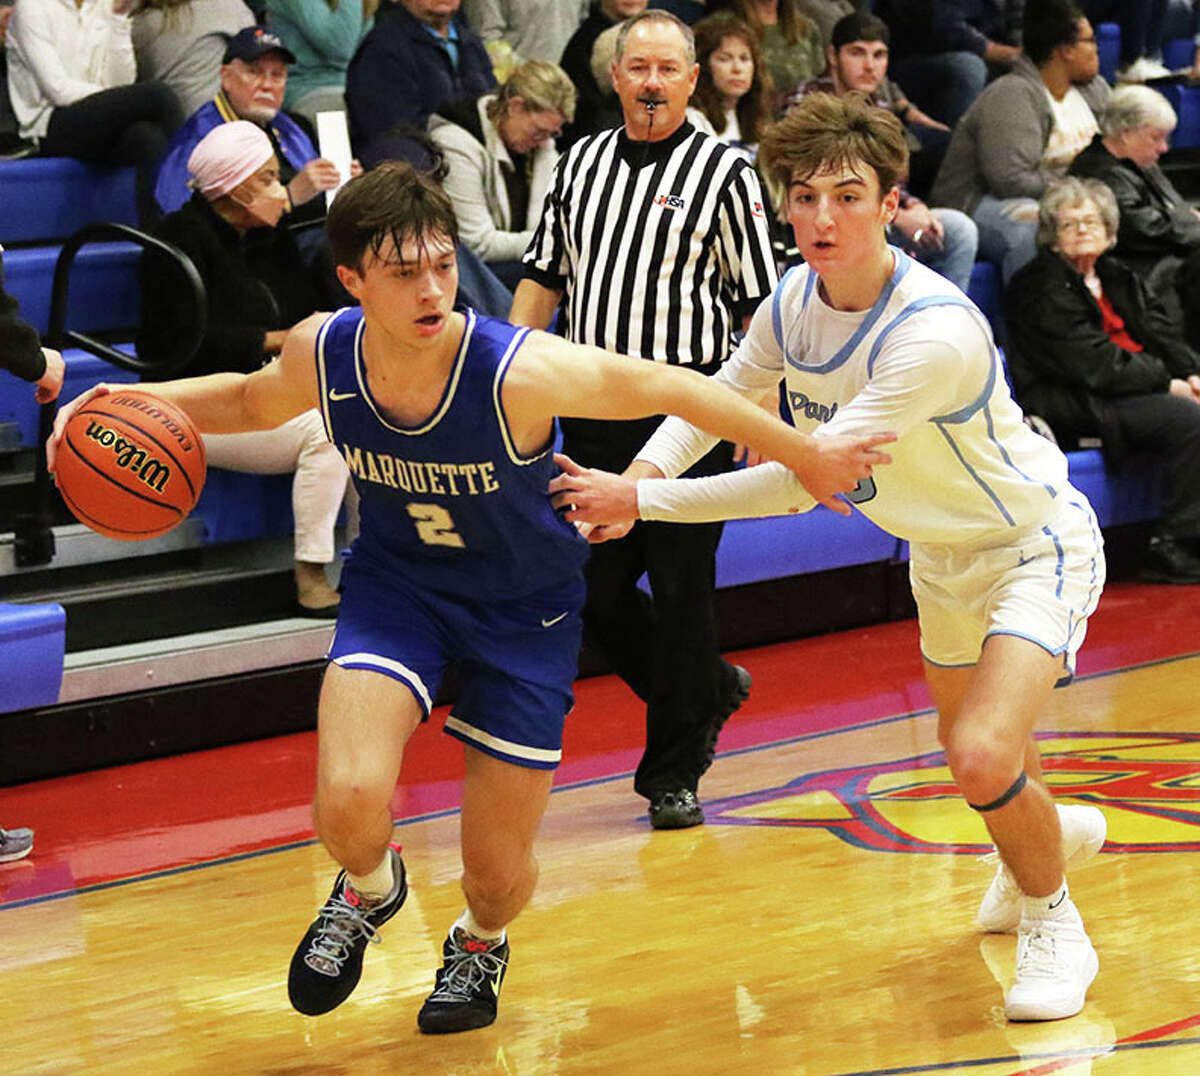 Marquette Catholic's Braden Kline (left) drives past Jersey's Jaxon Brunaugh in the first half Wednesday night at the Hoopsgiving Classic at Roxana. Both players had career scoring nights, with Kline getting 31 and Brunaugh getting 23.